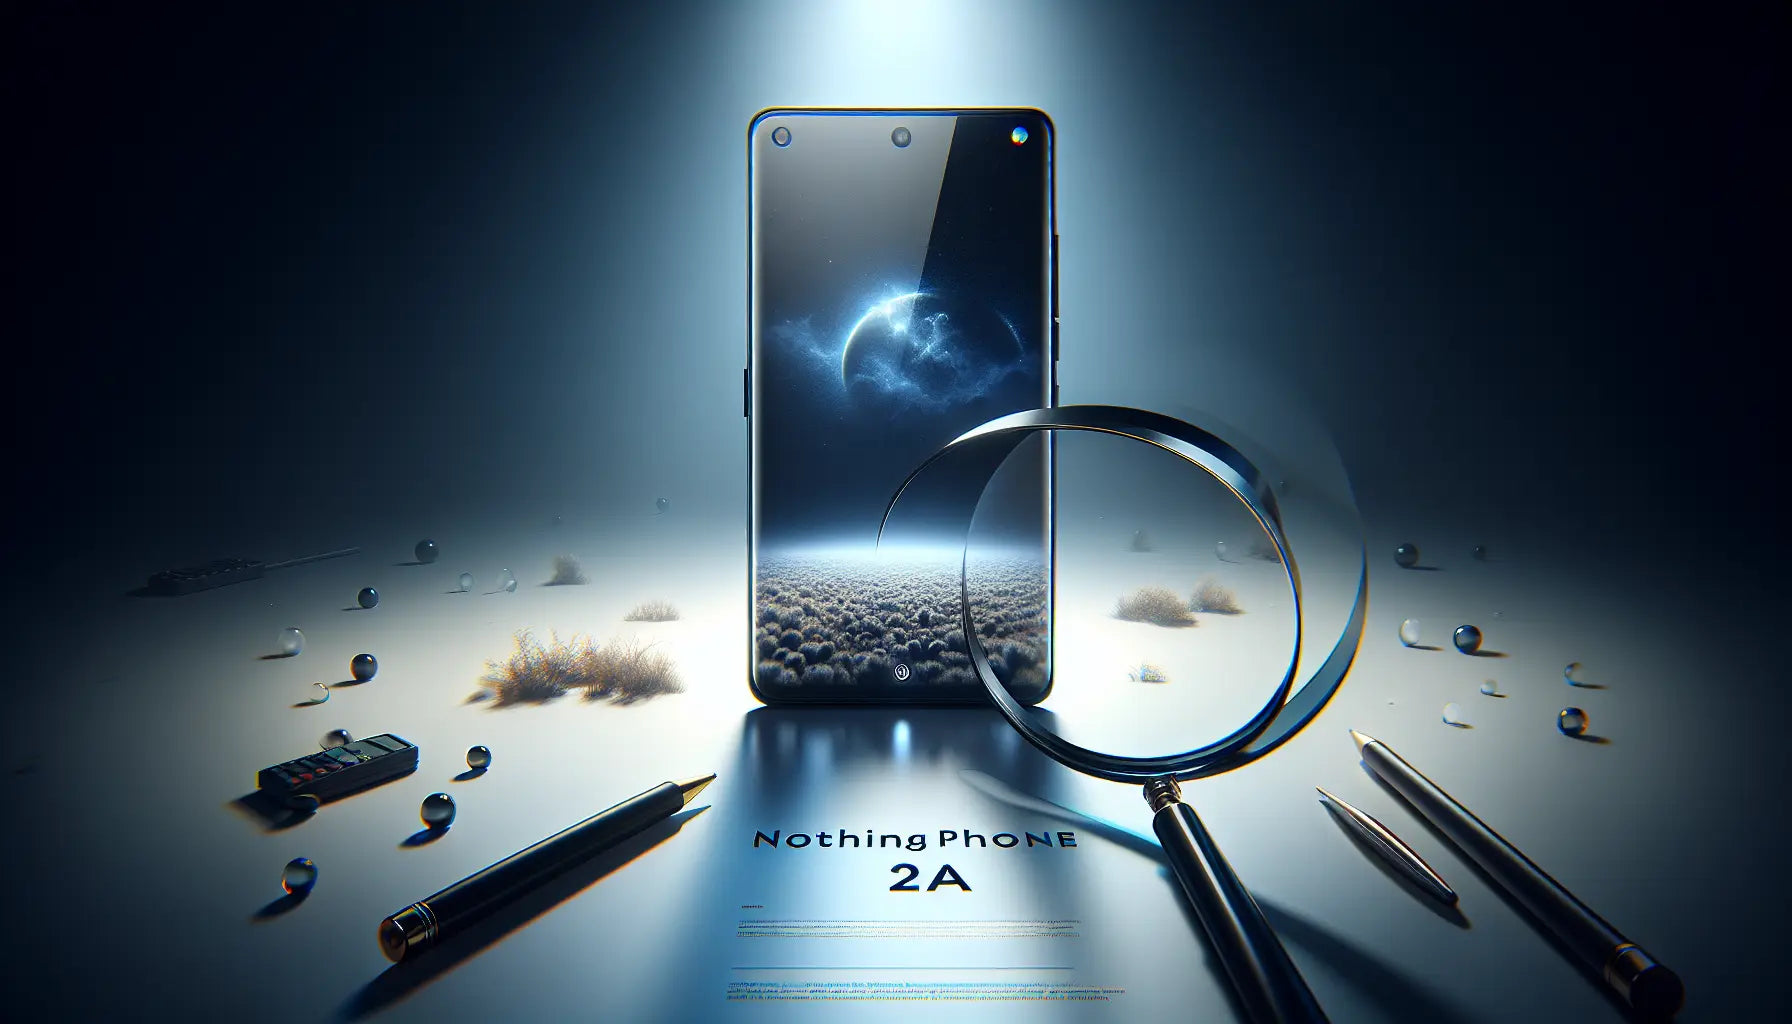 Unveiling the Nothing Phone 2A: A Promising Sub-Brand Debut